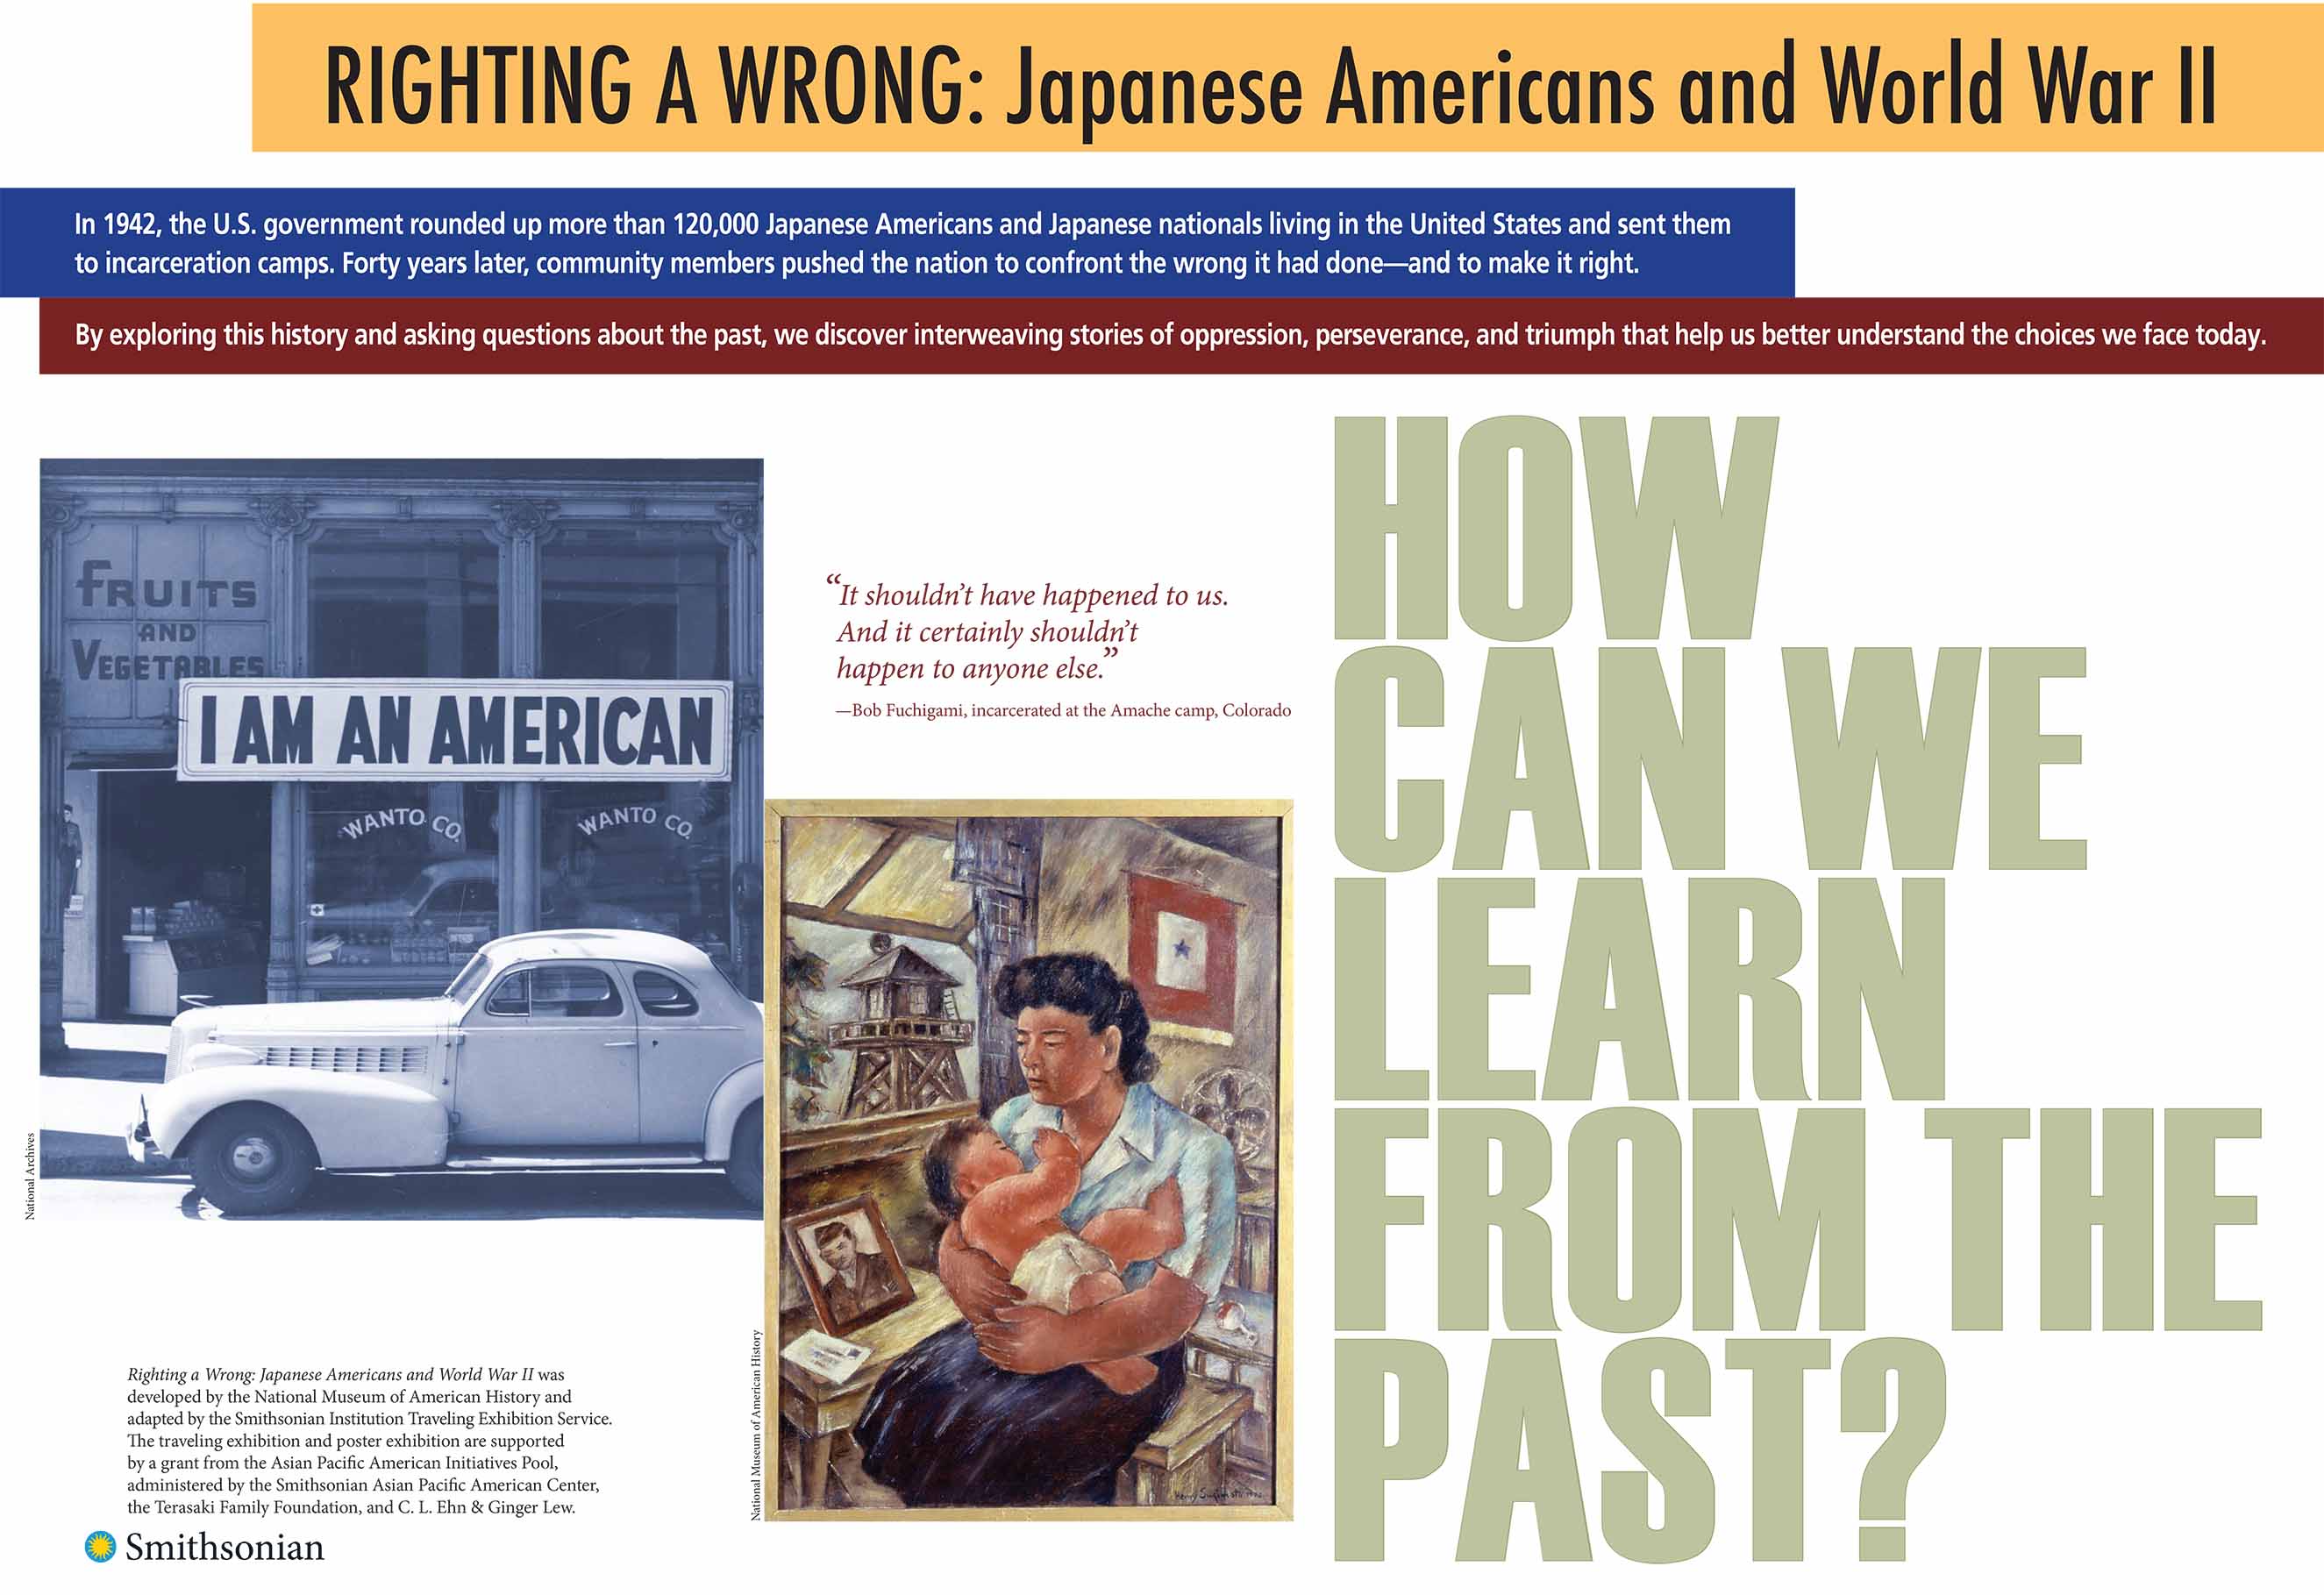 How Can We Learn From the Past Poster from the Smithsonian Institute